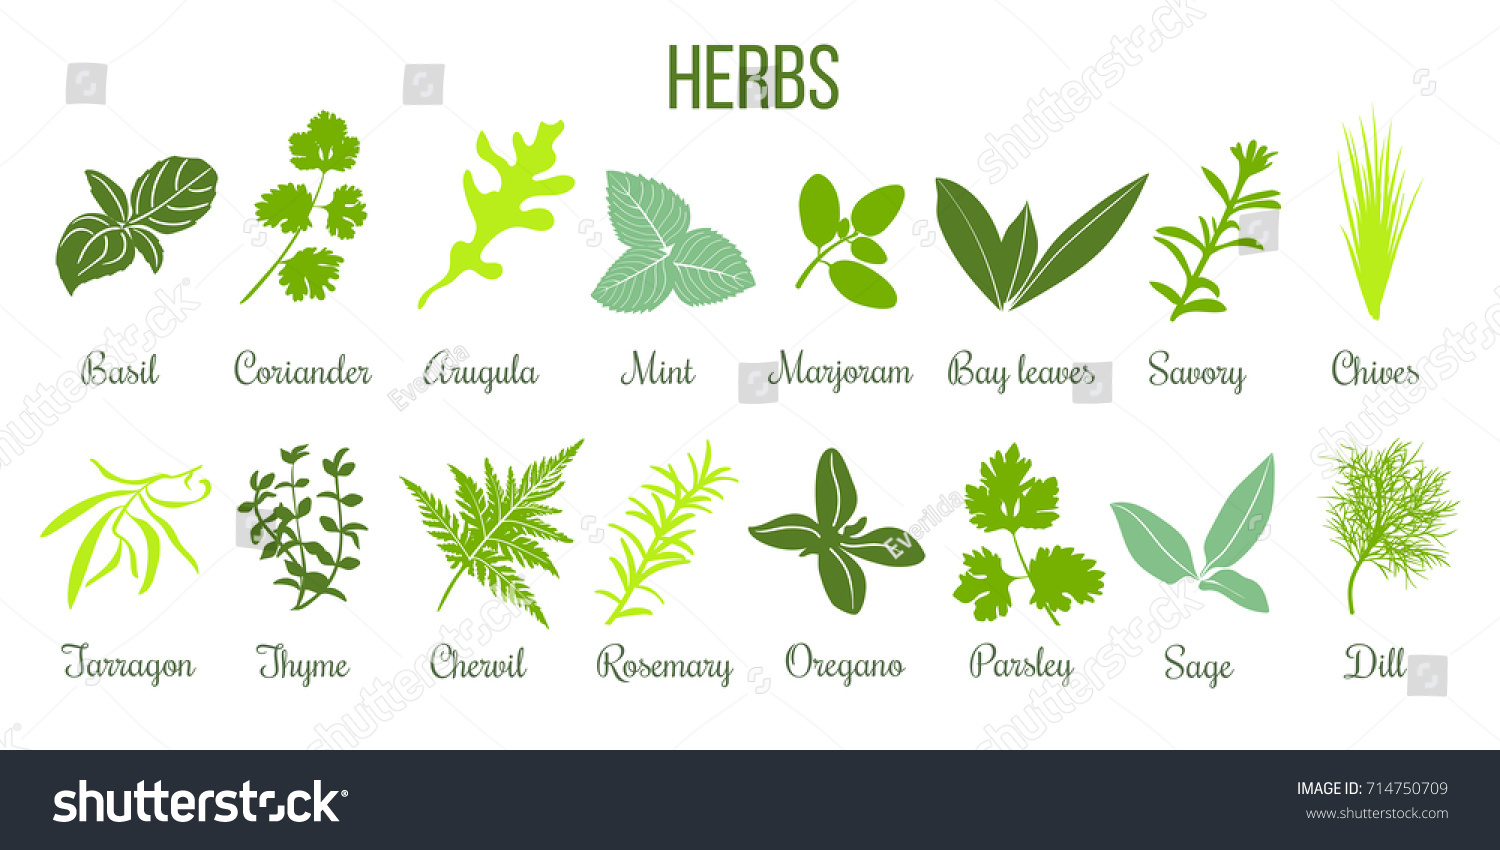 Big icon set of popular culinary herbs. Flat style. Basil, coriander, mint, rosemary, sage, basil, thyme, parsley etc. For cooking, cosmetics, store, health care, tag label, food design #714750709